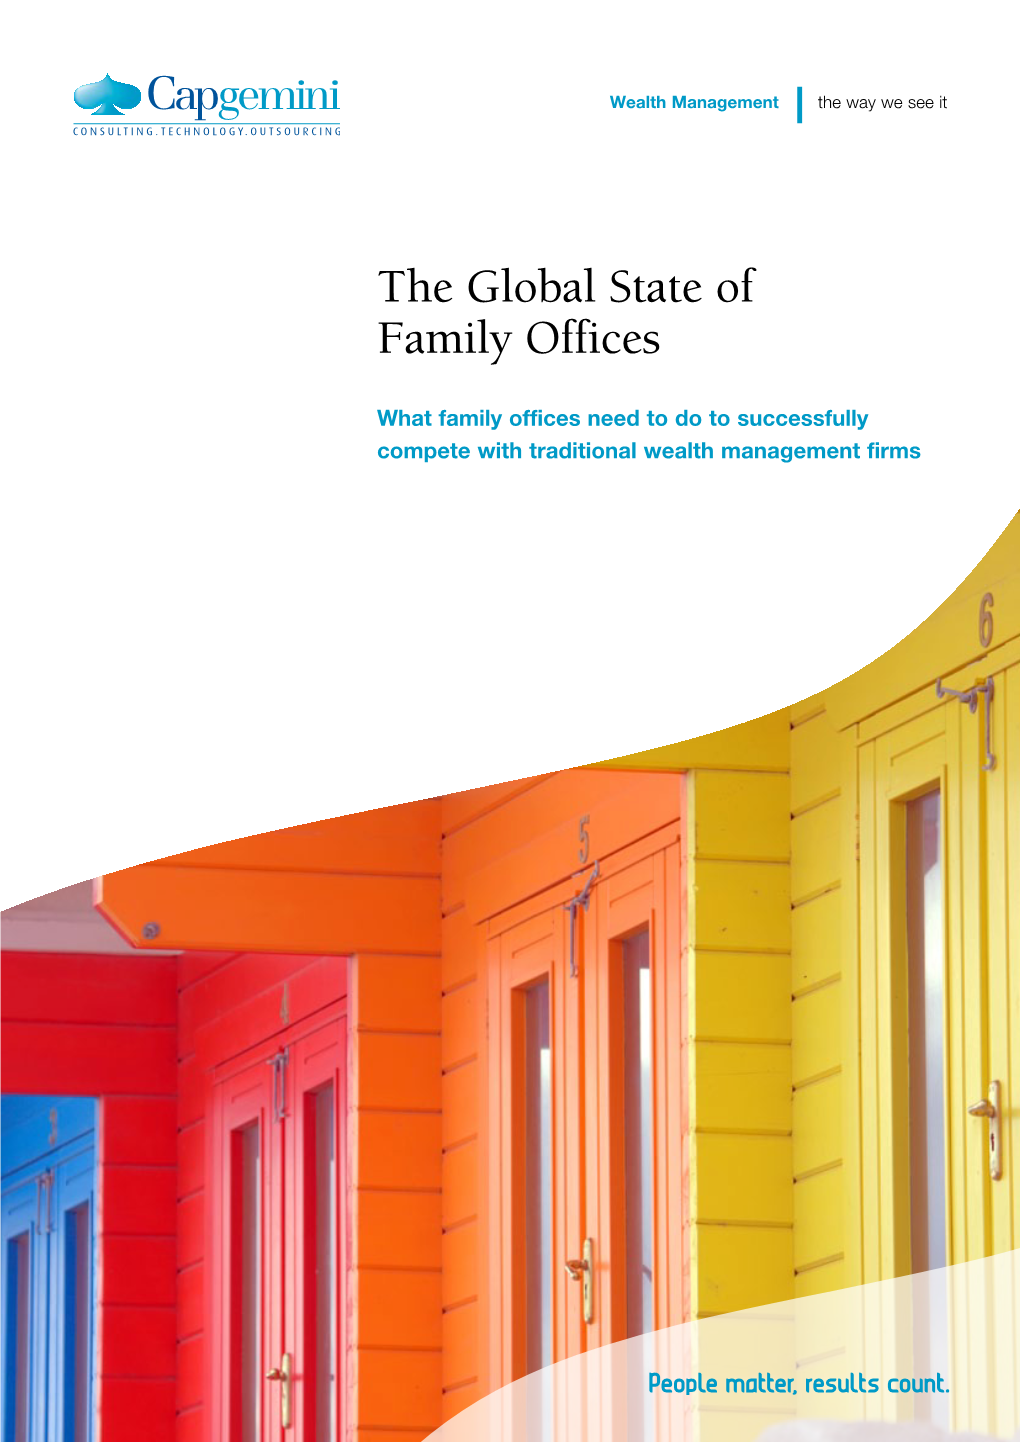 The Global State of Family Offices